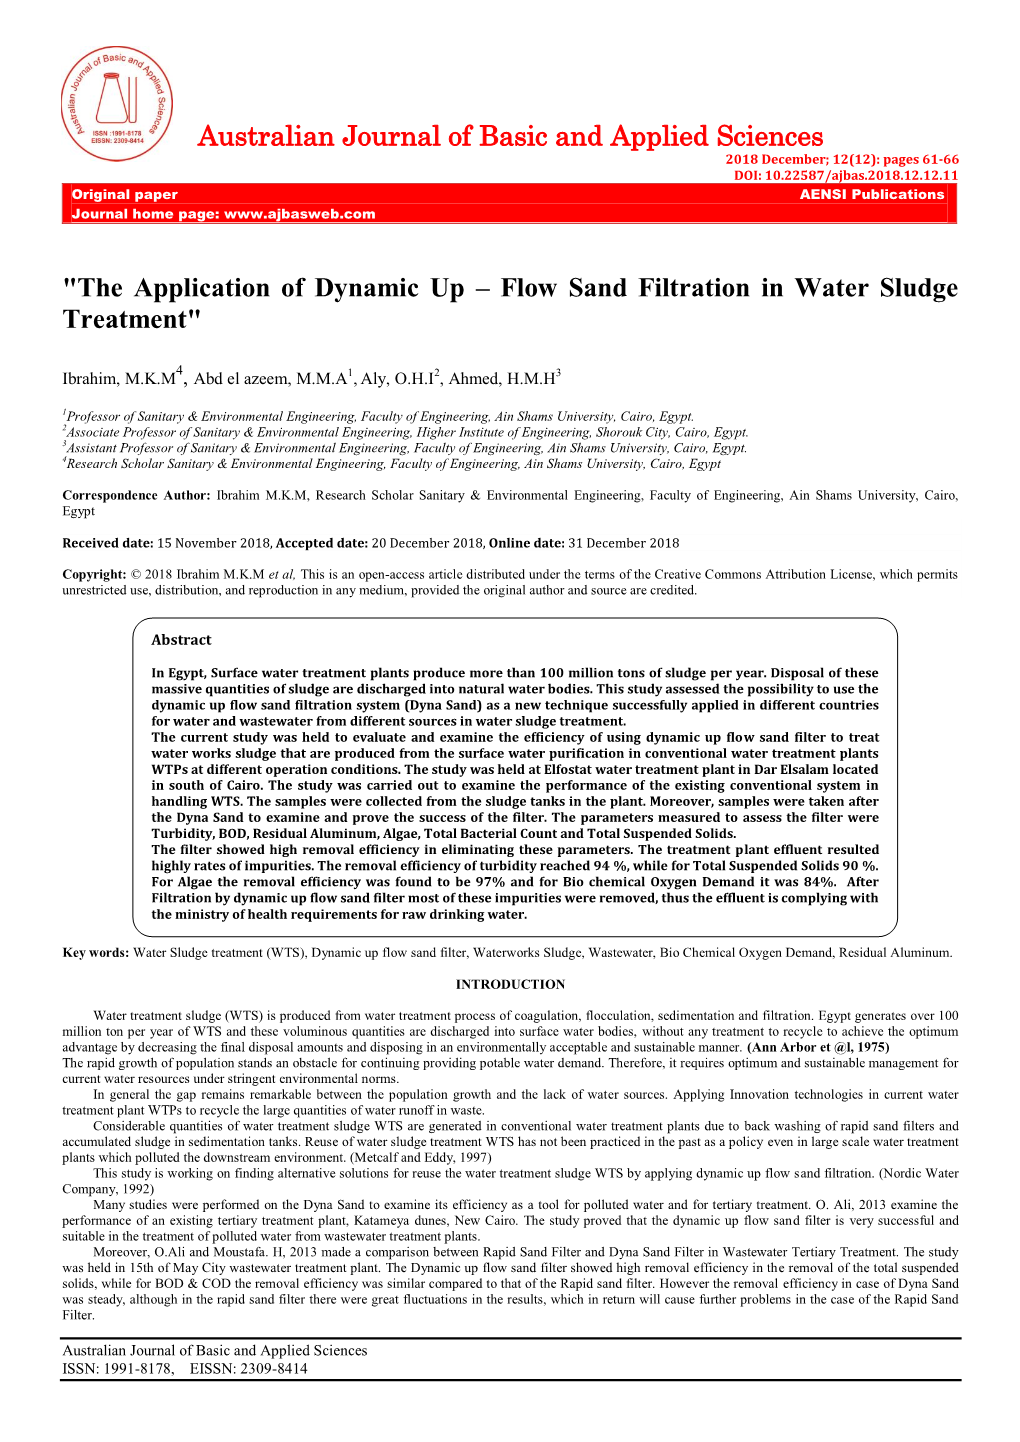 The Application of Dynamic up – Flow Sand Filtration in Water Sludge Treatment"